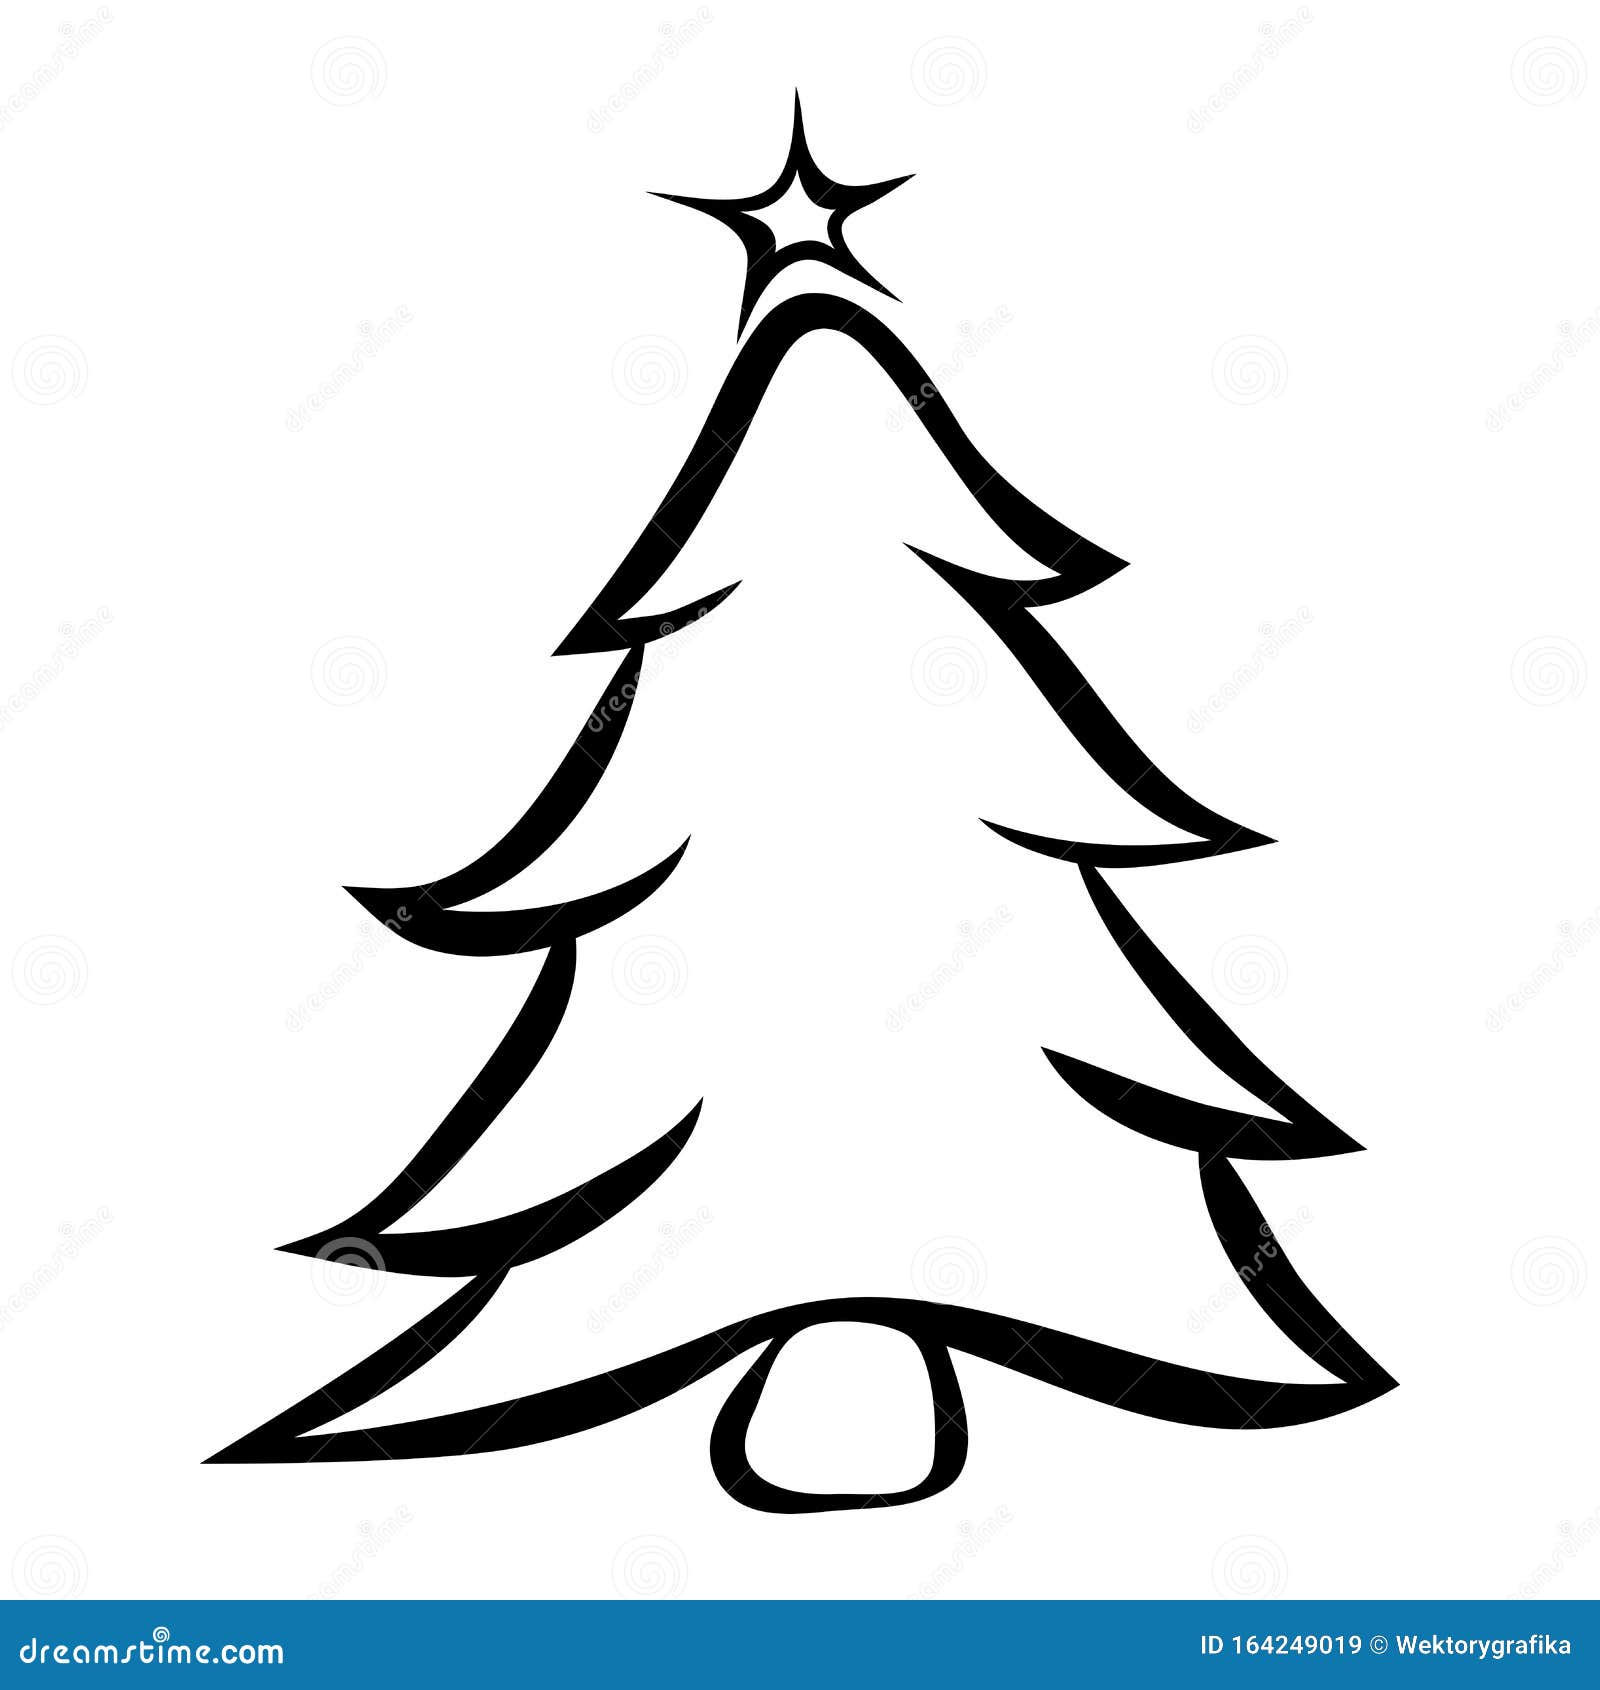 Christmas Tree Outline Svg Free - Free SVG Images